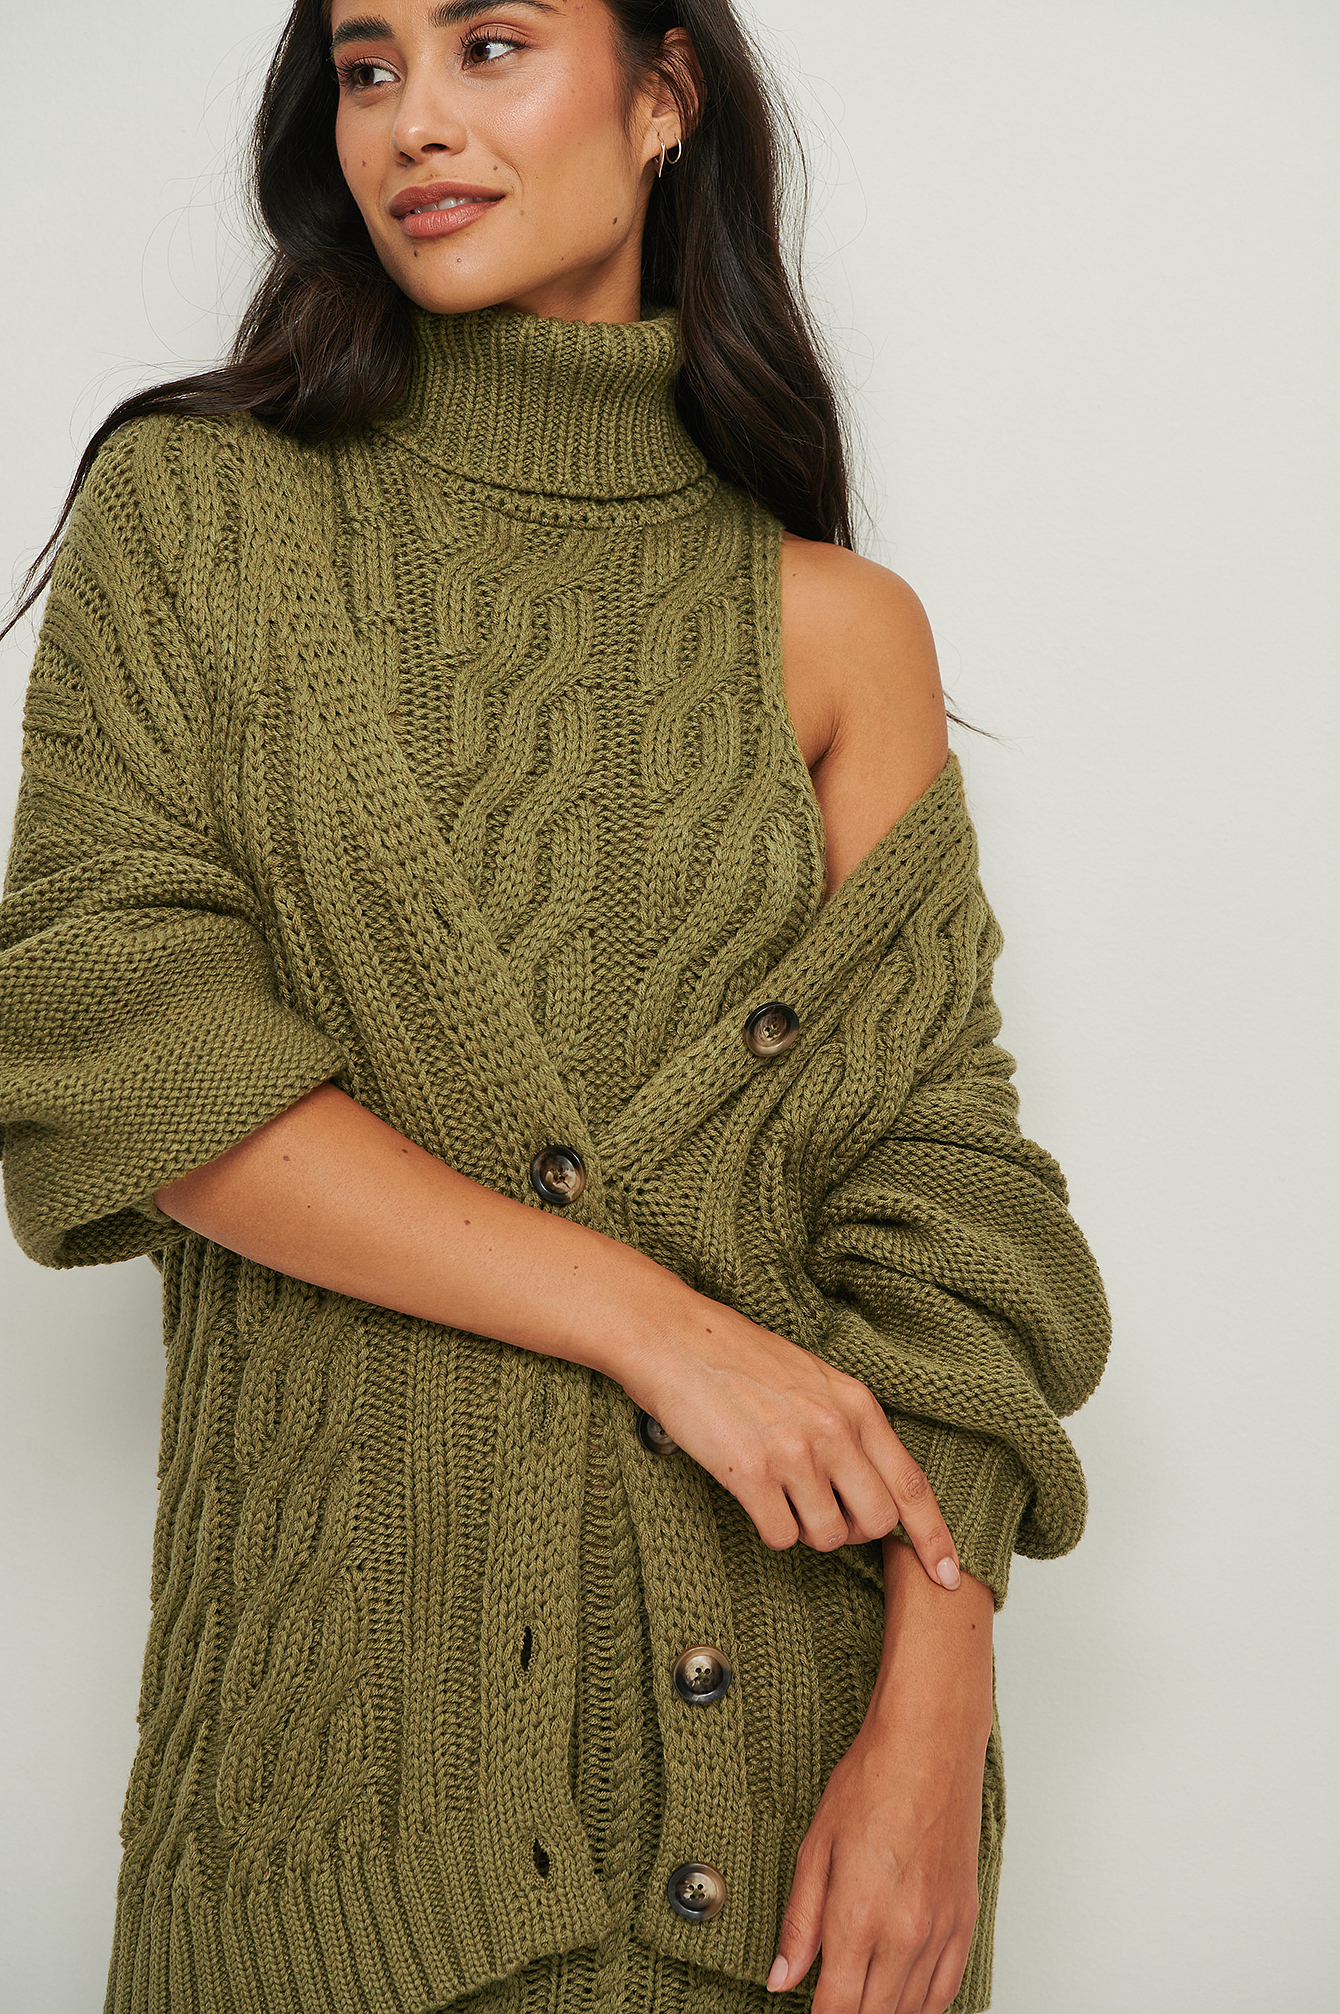 Olive Green Recycled Cable Knitted Cardigan